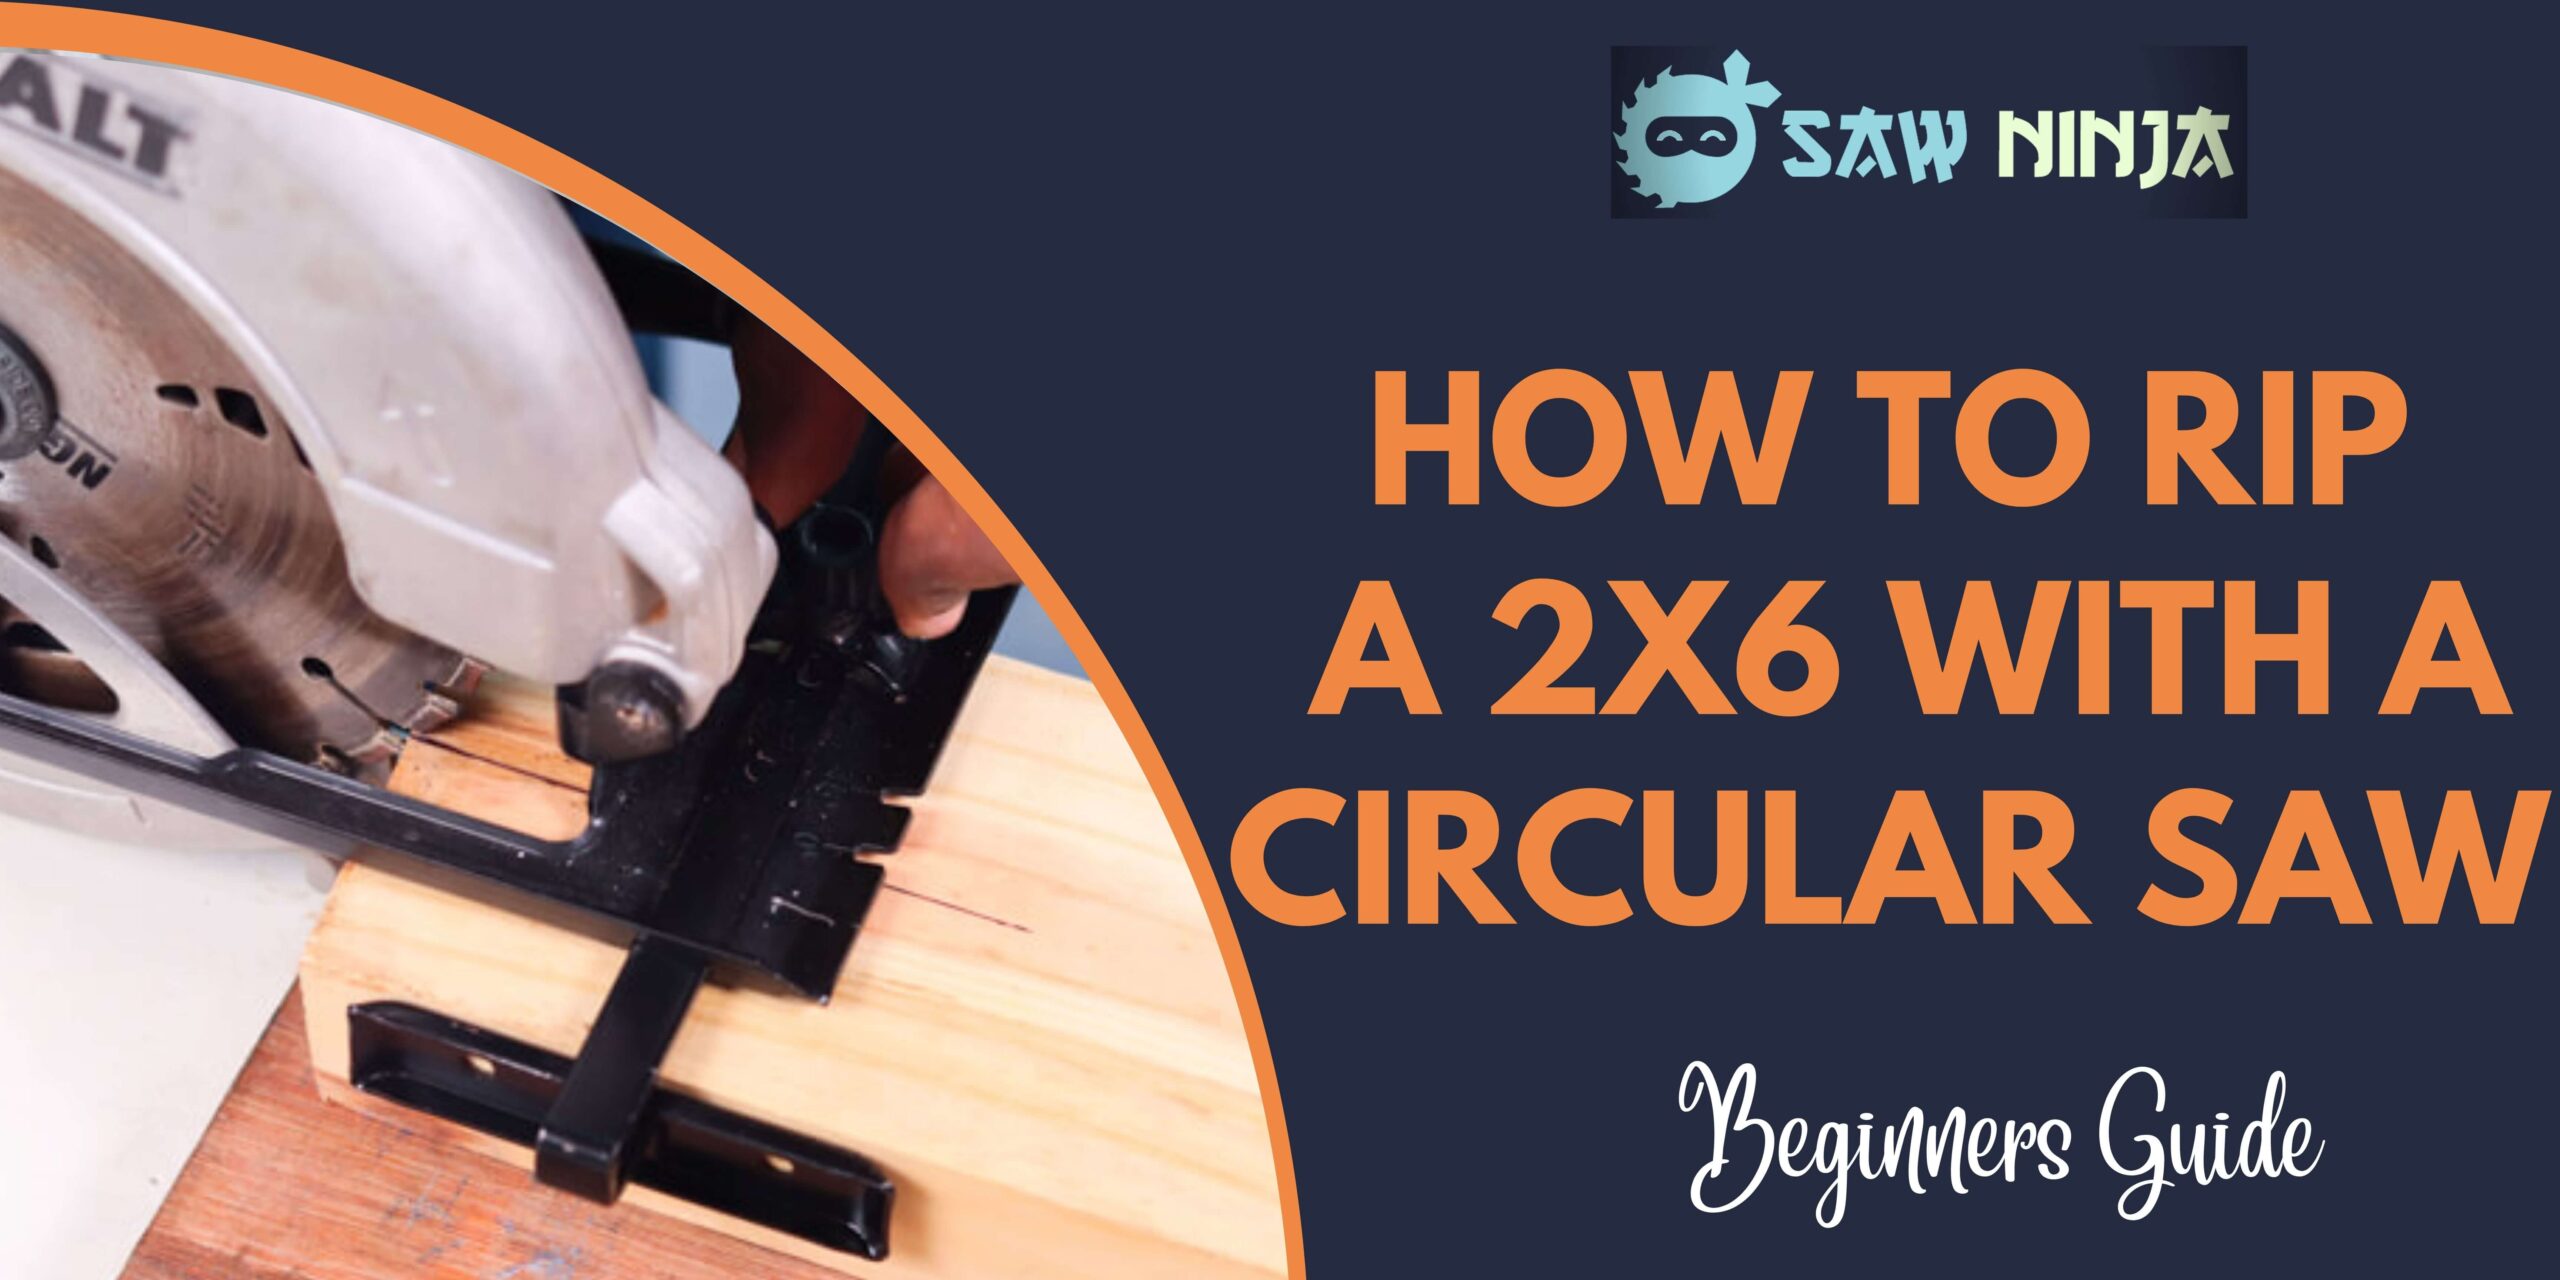 How to Rip a 2x6 With a Circular Saw